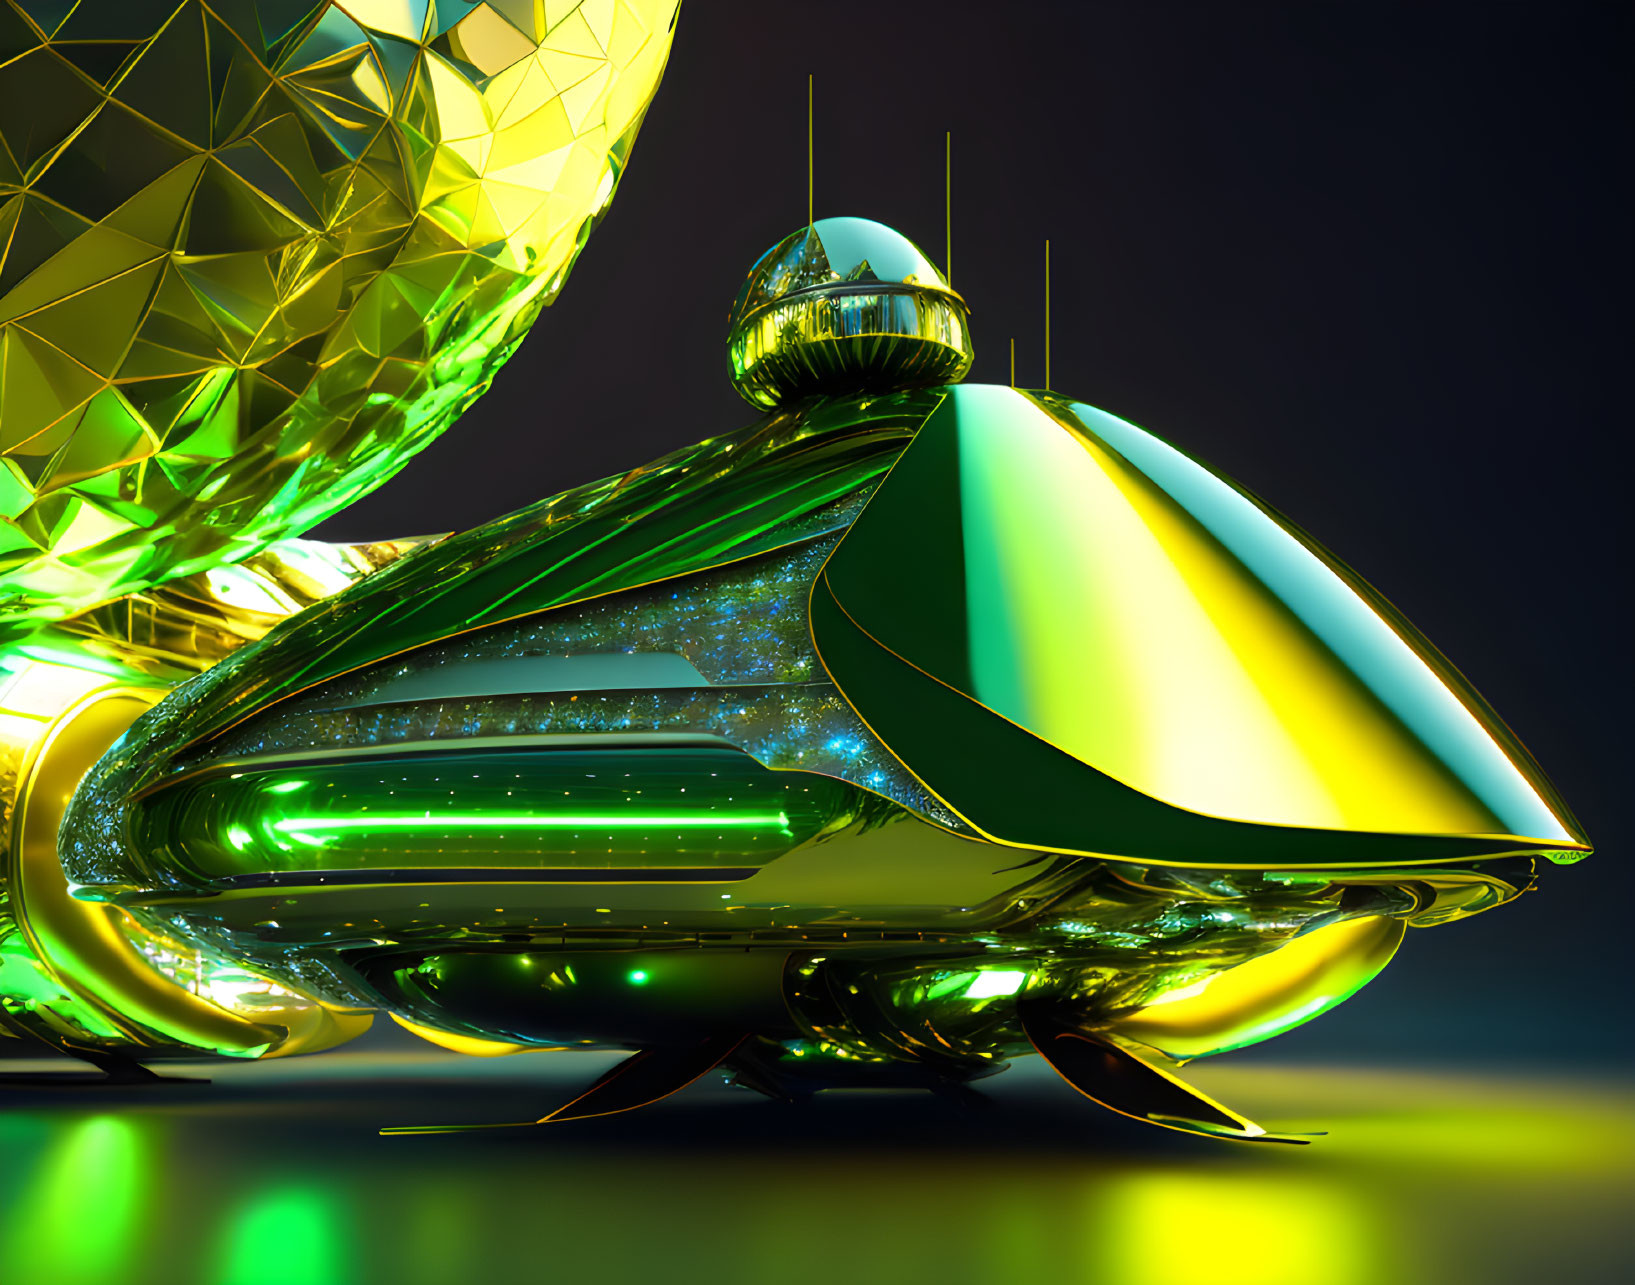 Futuristic shiny spaceship with green and yellow panels next to geometric structure